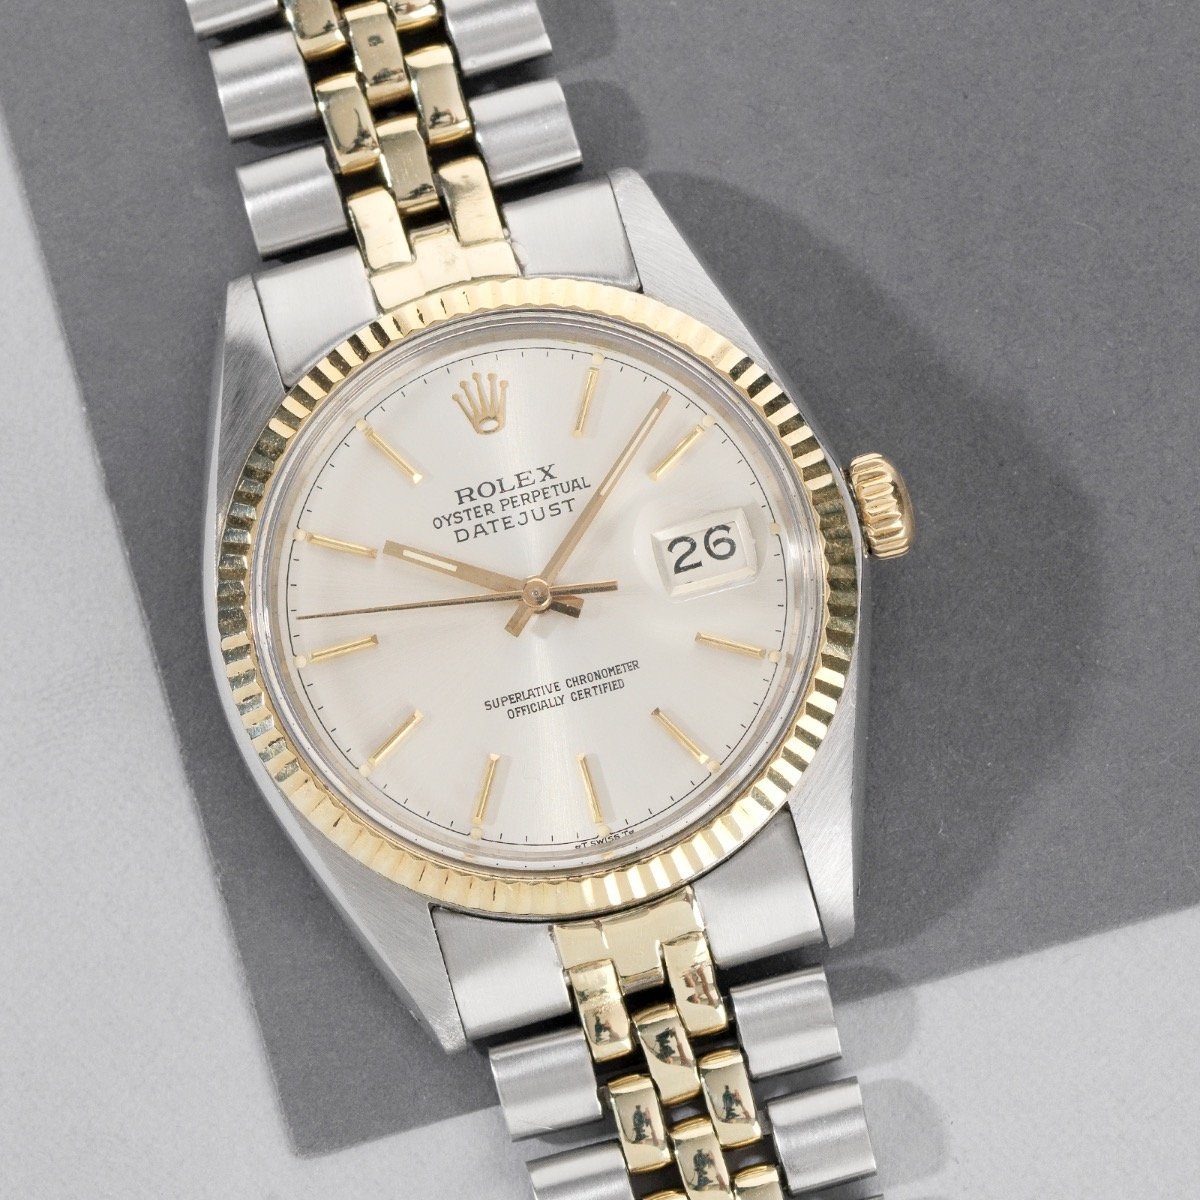 Rolex Datejust Rare Chapter-Ring Dial 16013